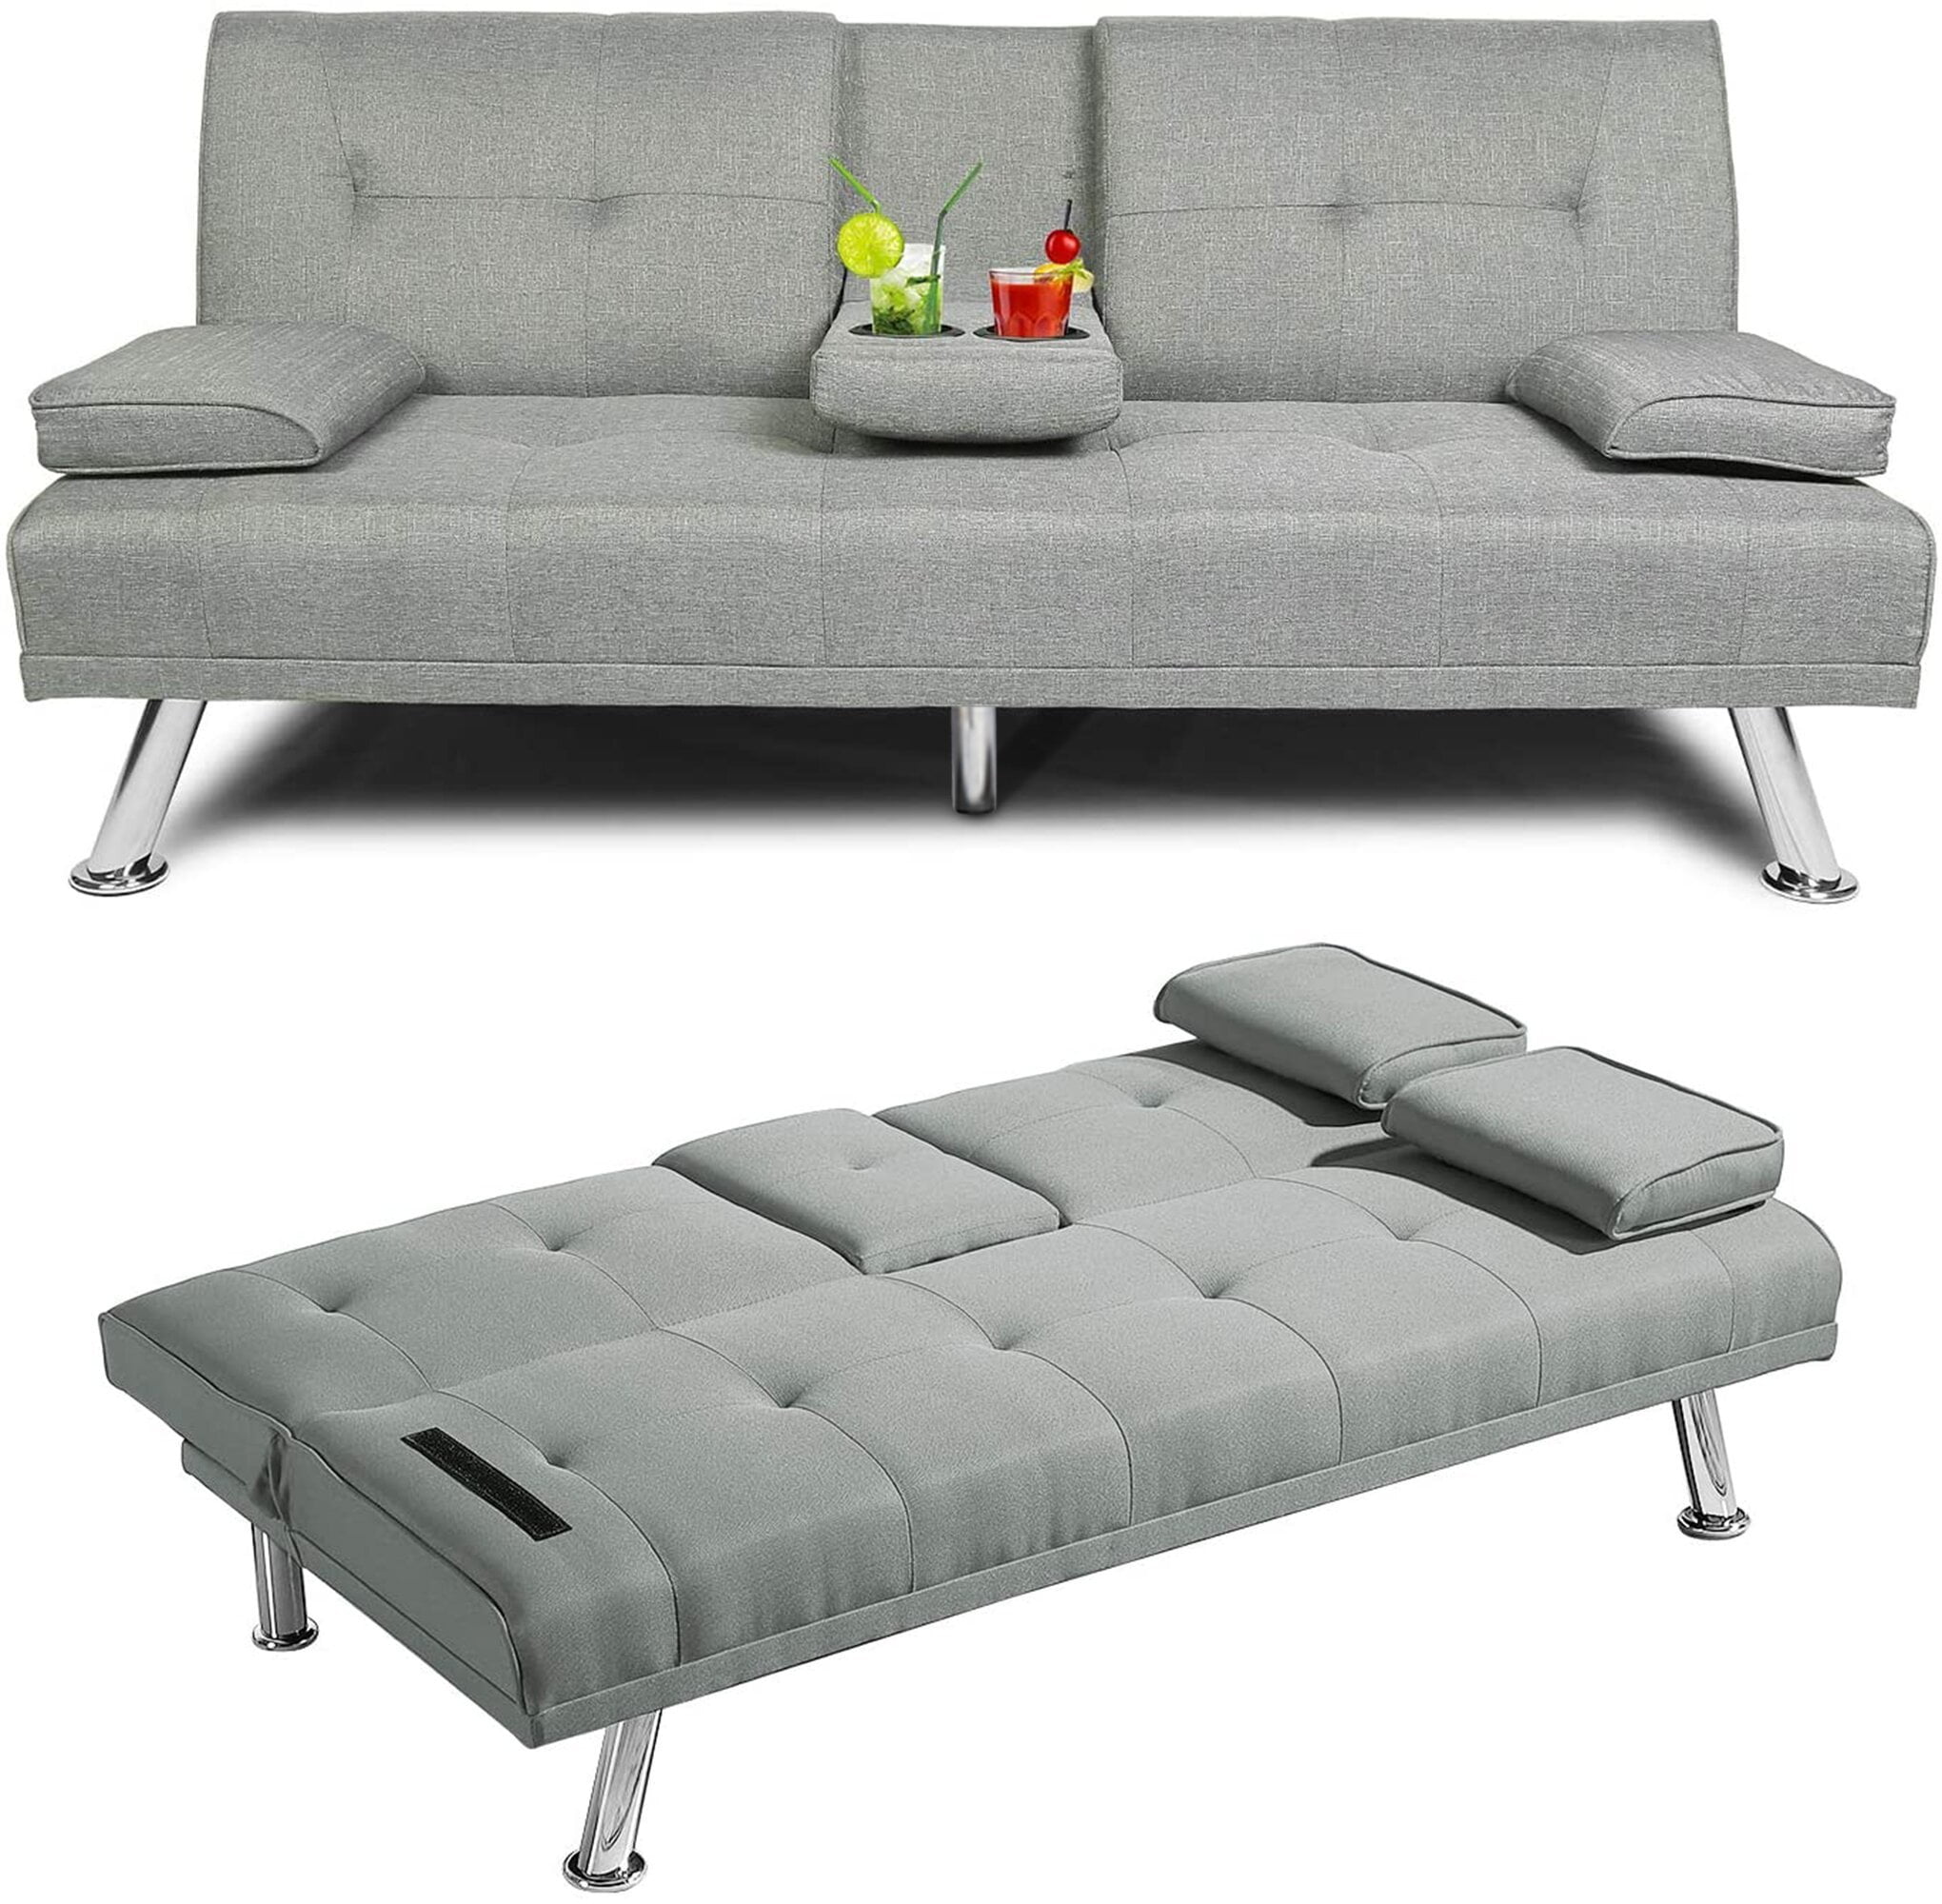 Gray Futon Couch W/ Microfiber Cover Home Office Sofa Bed Furniture Full Twin 